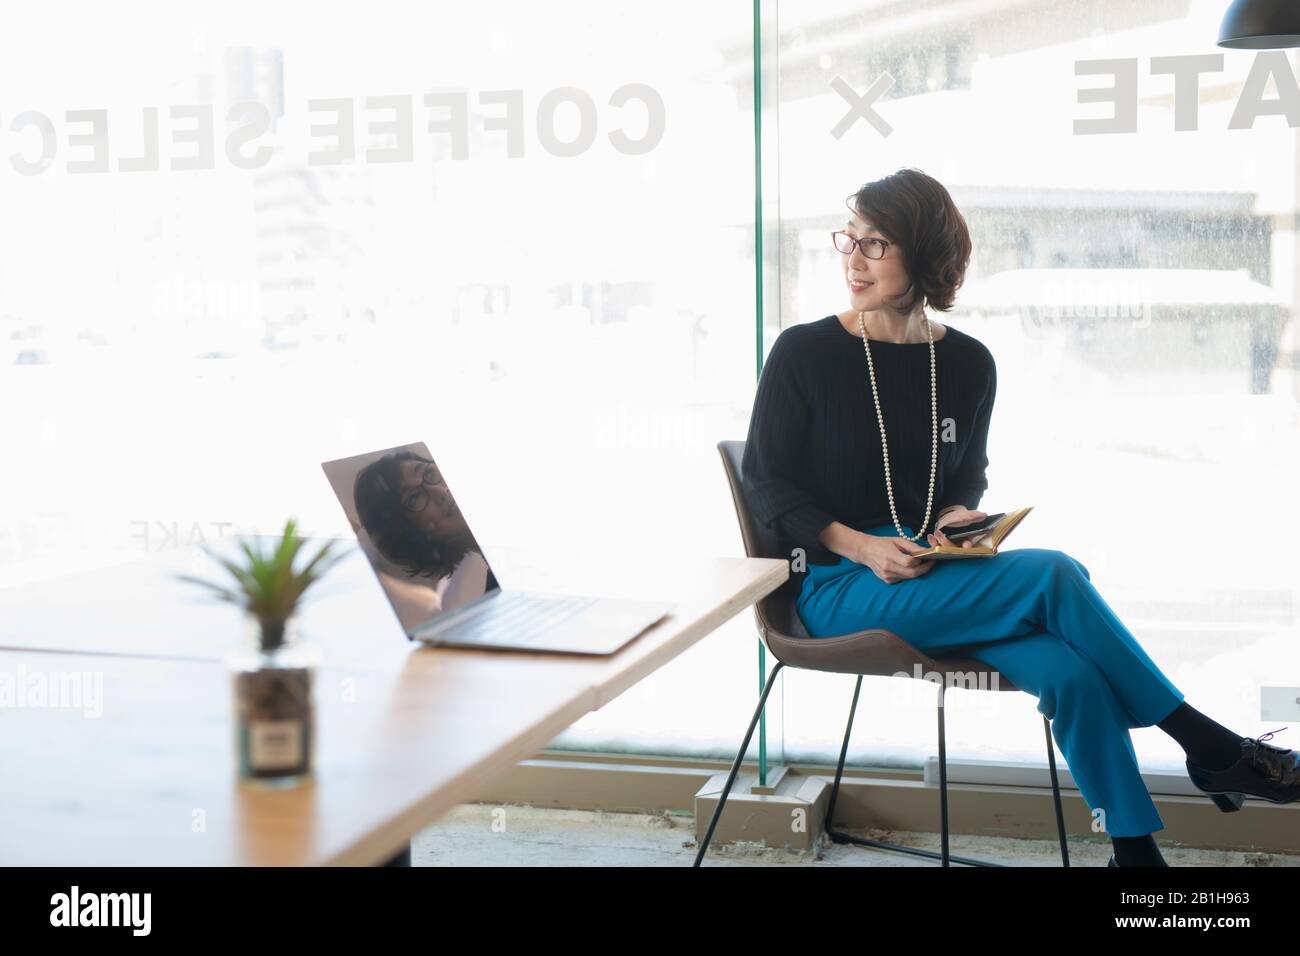 Smiling woman looking over shoulder in coworking office space Stock Photo